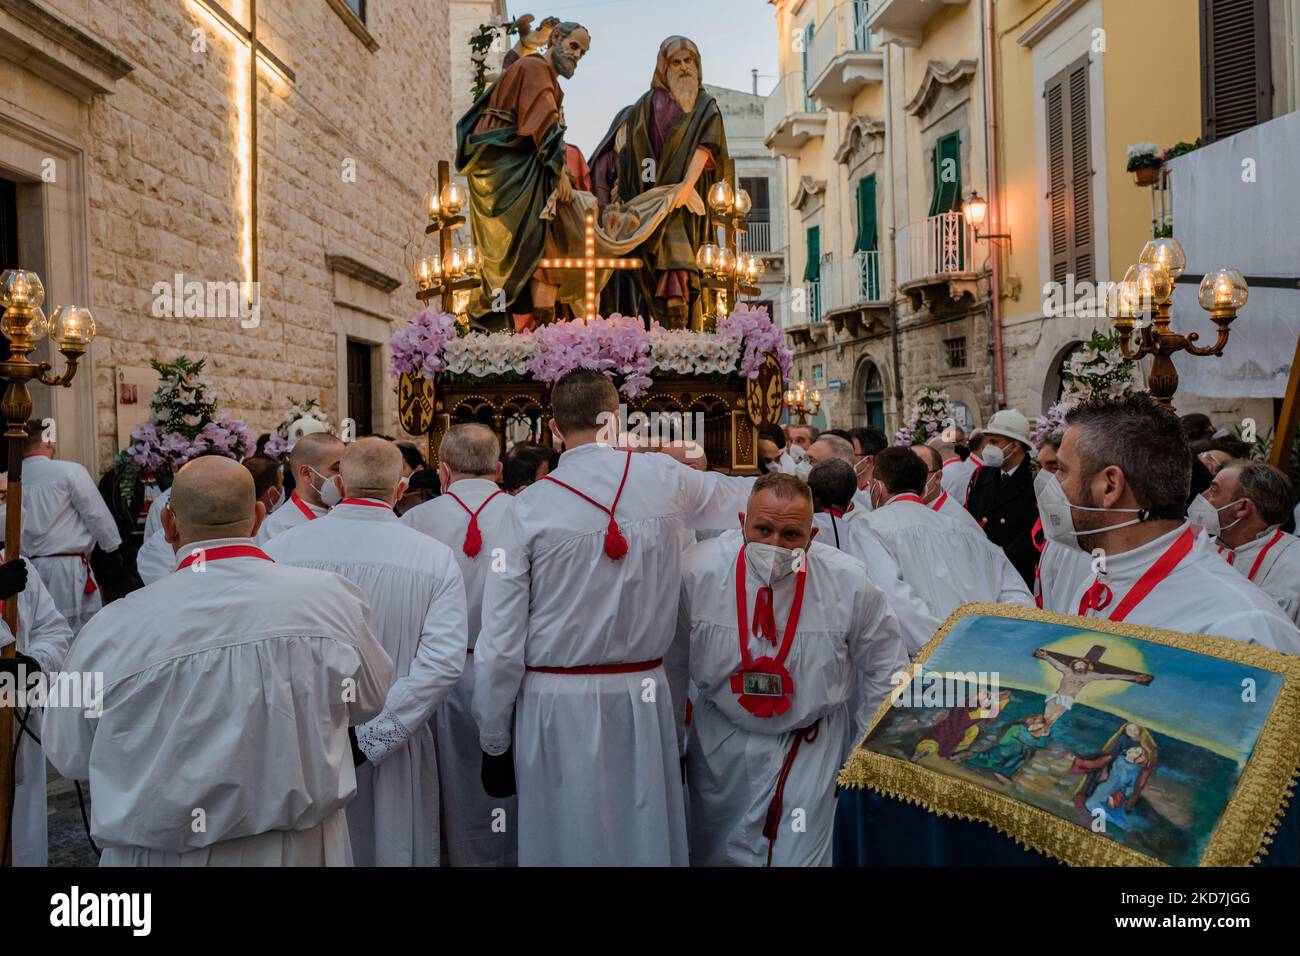 The Eight Saints, on Holy Thursday in procession in Ruvo di Puglia on April 14, 2022. After a two-year stop for the most acute phase of the Covid pandemic, the night of the Eight Saints has returned, as popular tradition calls the statuary group of the 'Transport of Christ to the Sepulcher', which, since 1920, has been conducted in procession by associates of the Confraternity Opera Pia San Rocco in Ruvo di Puglia, starting from the homonymous church where the statues are venerated. At 2 o'clock this night, Holy Thursday, in Piazza Menotti Garibaldi, the foot march took place by the 'N. Cassan Stock Photo